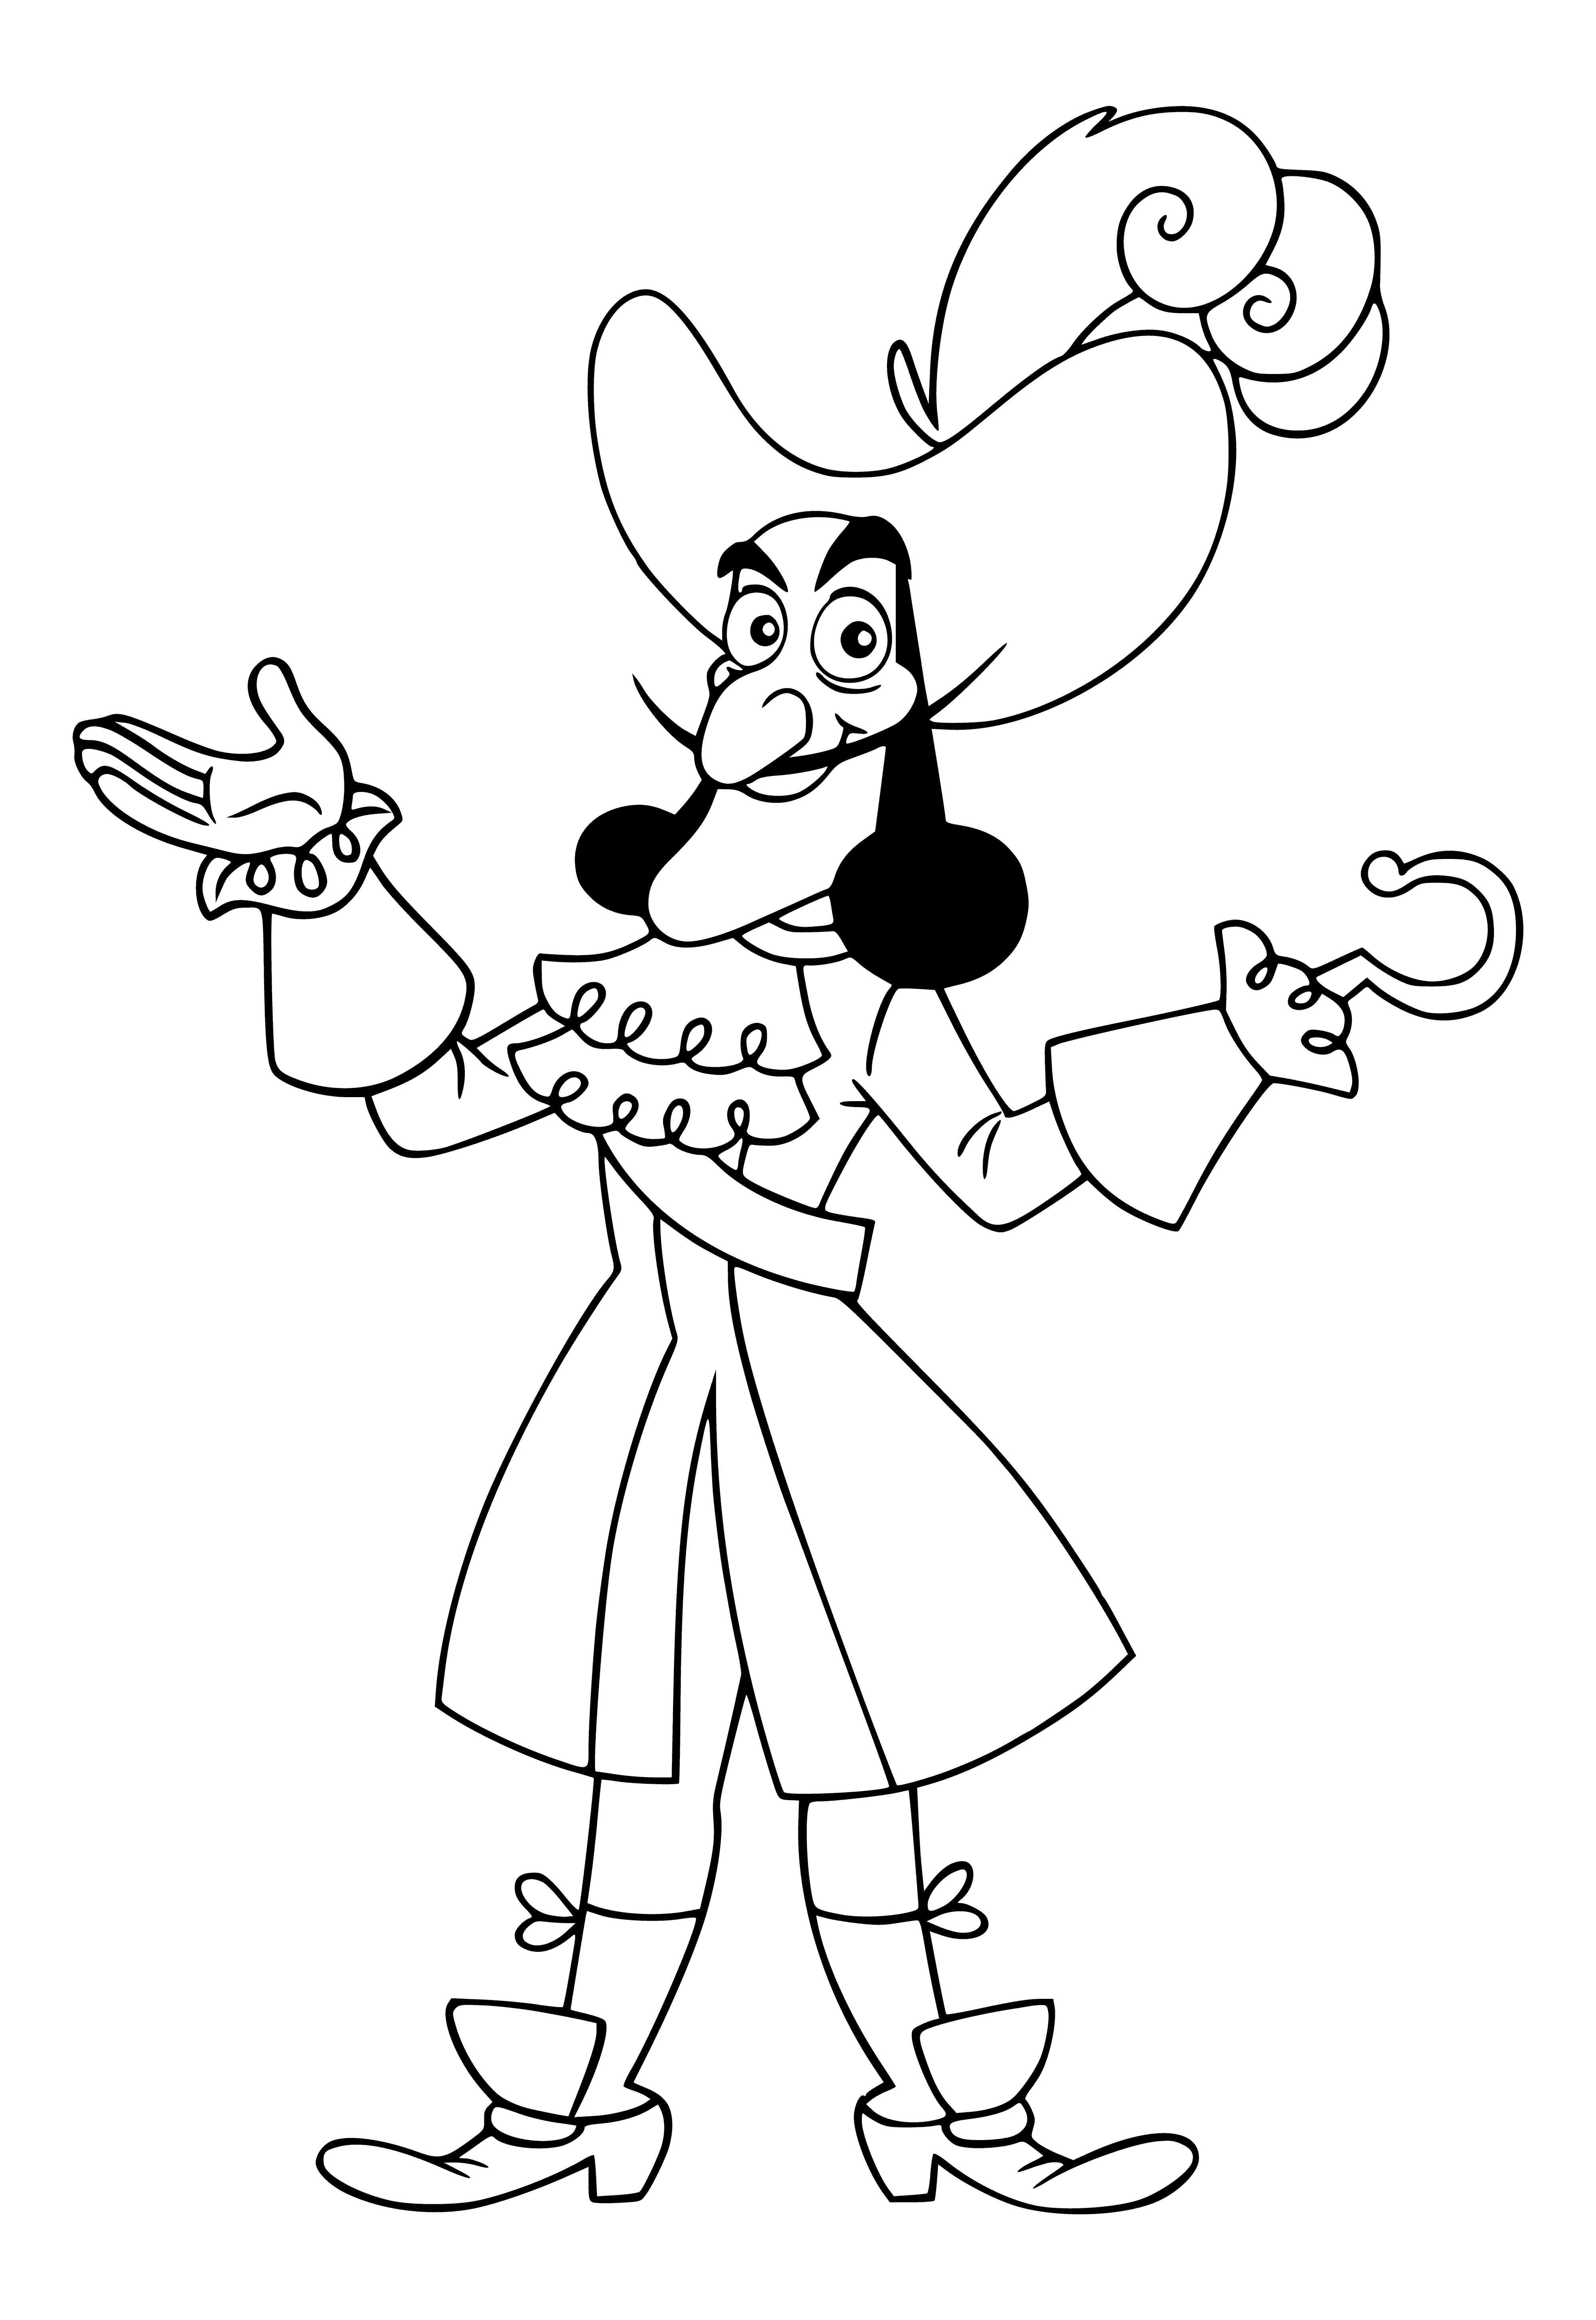 Captain Hook coloring page